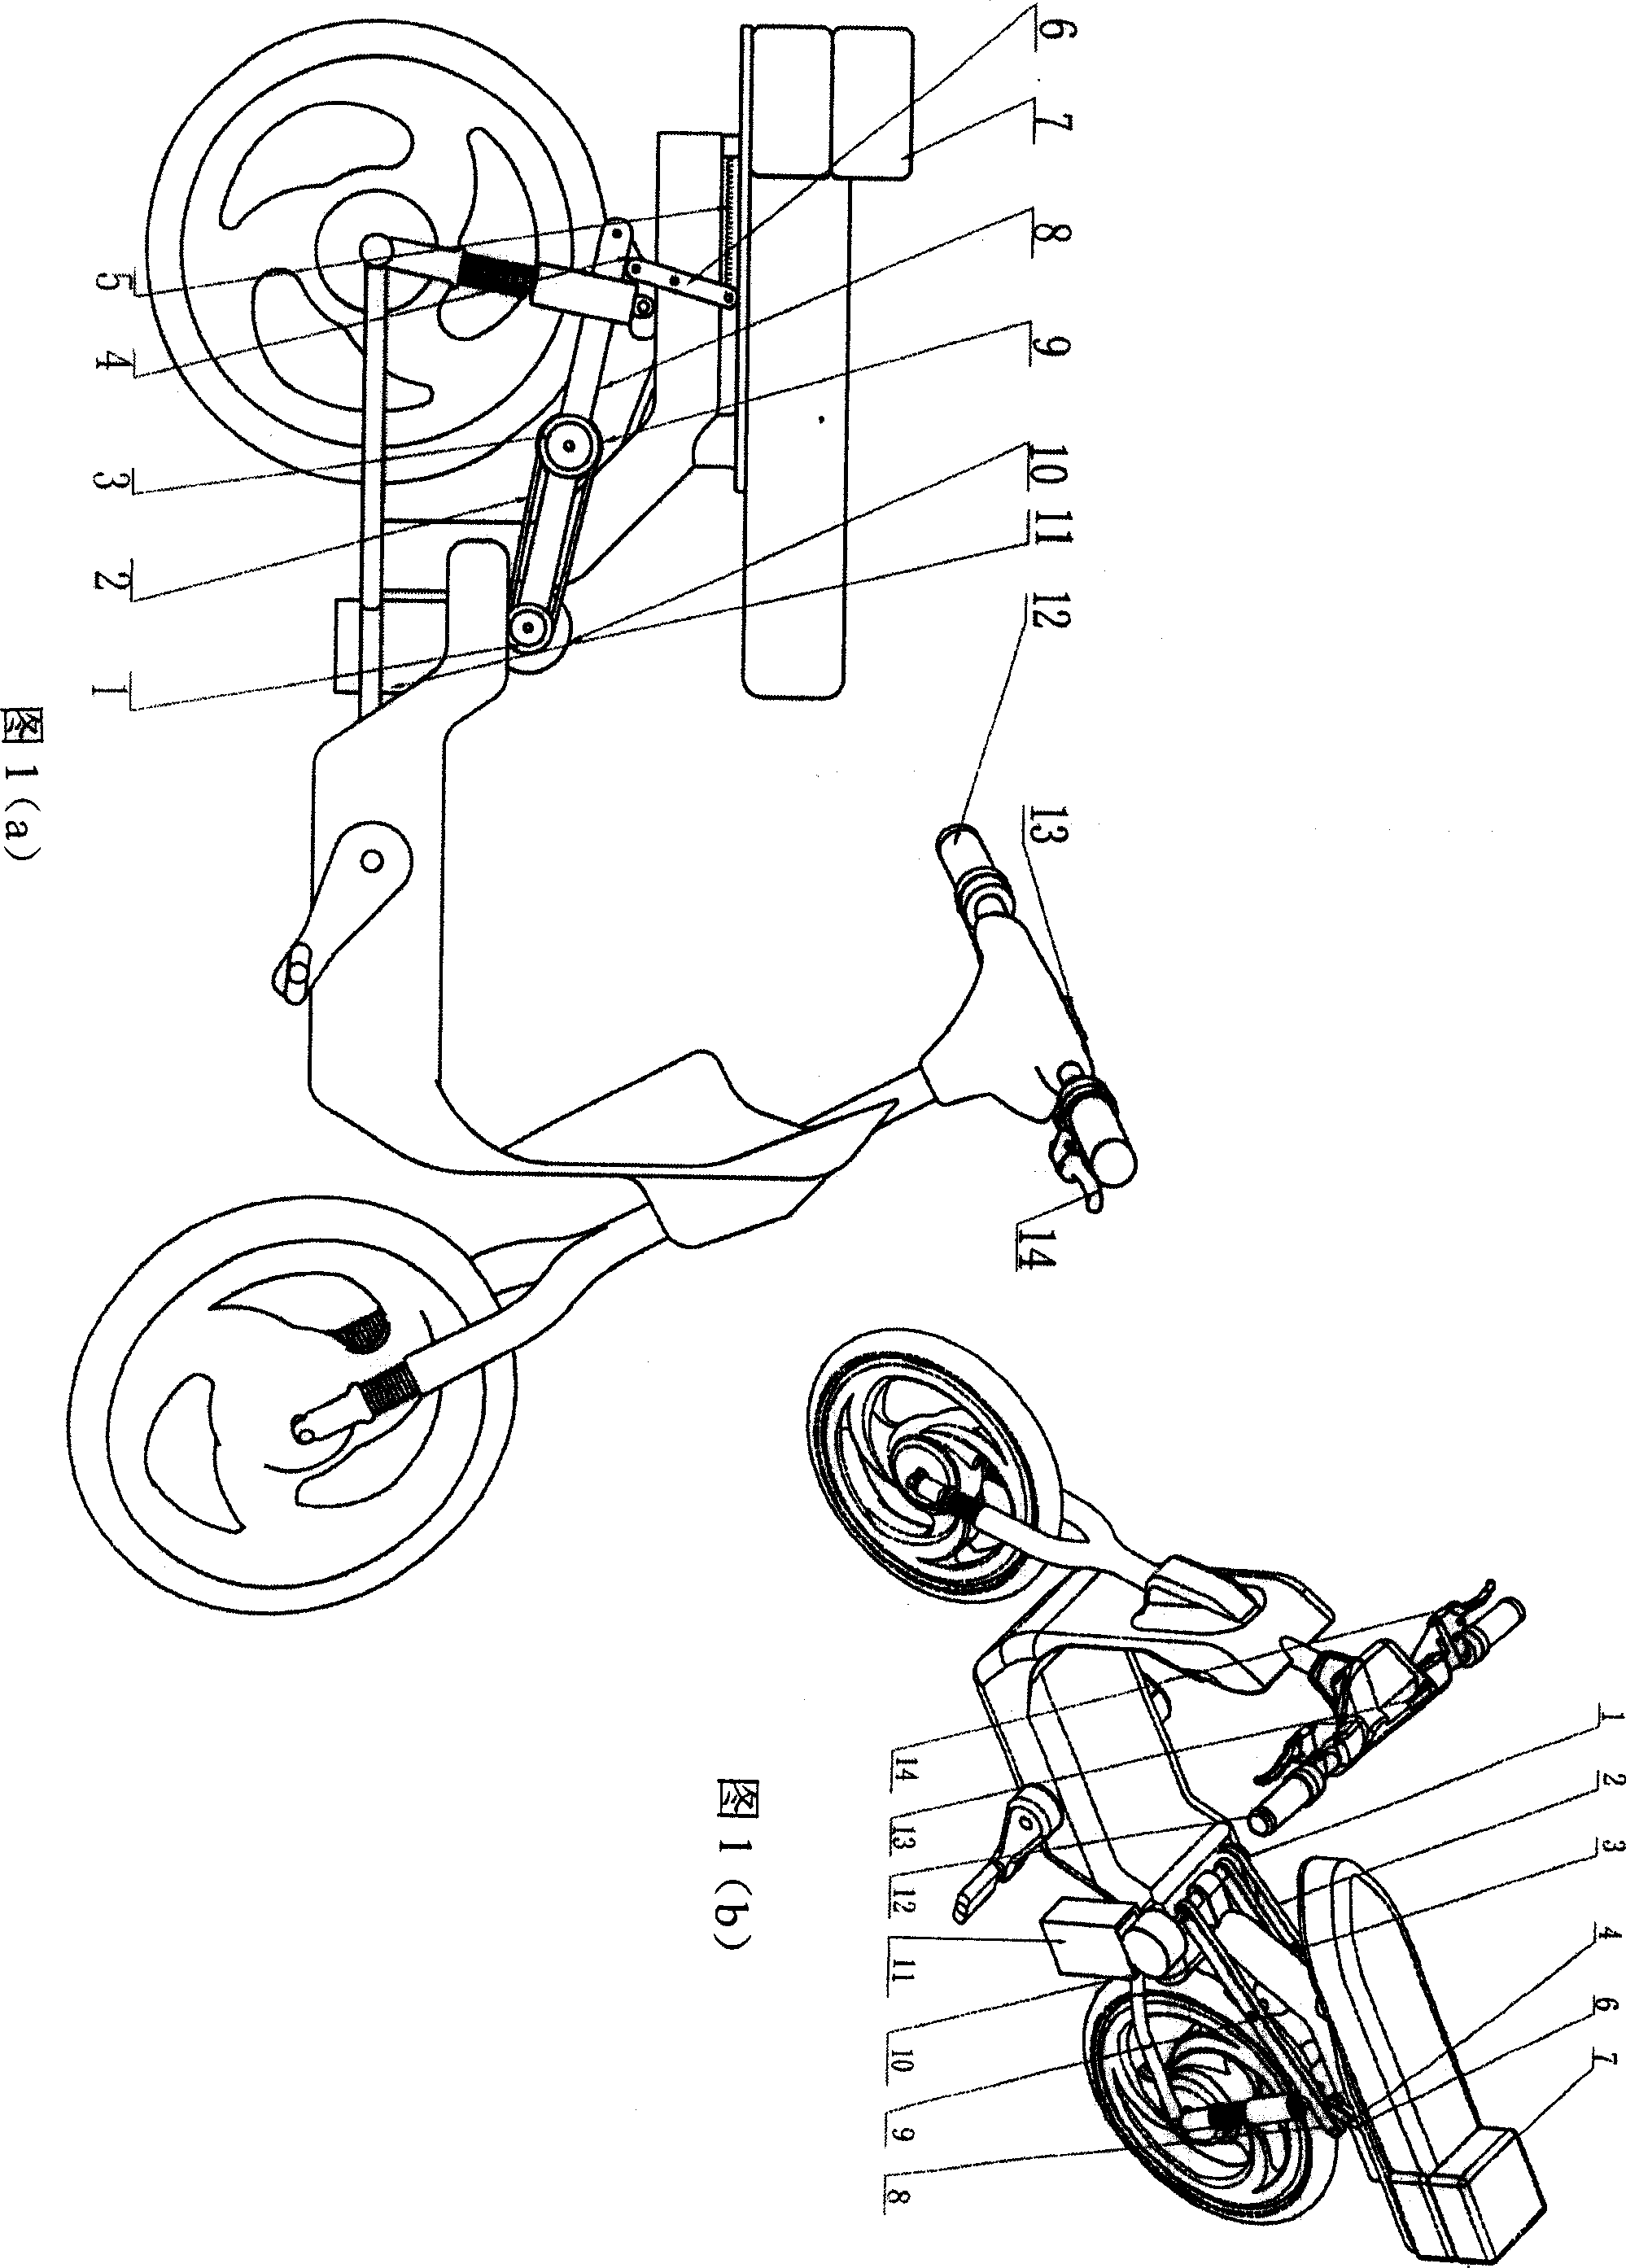 Electric vehicle brake power recovering device